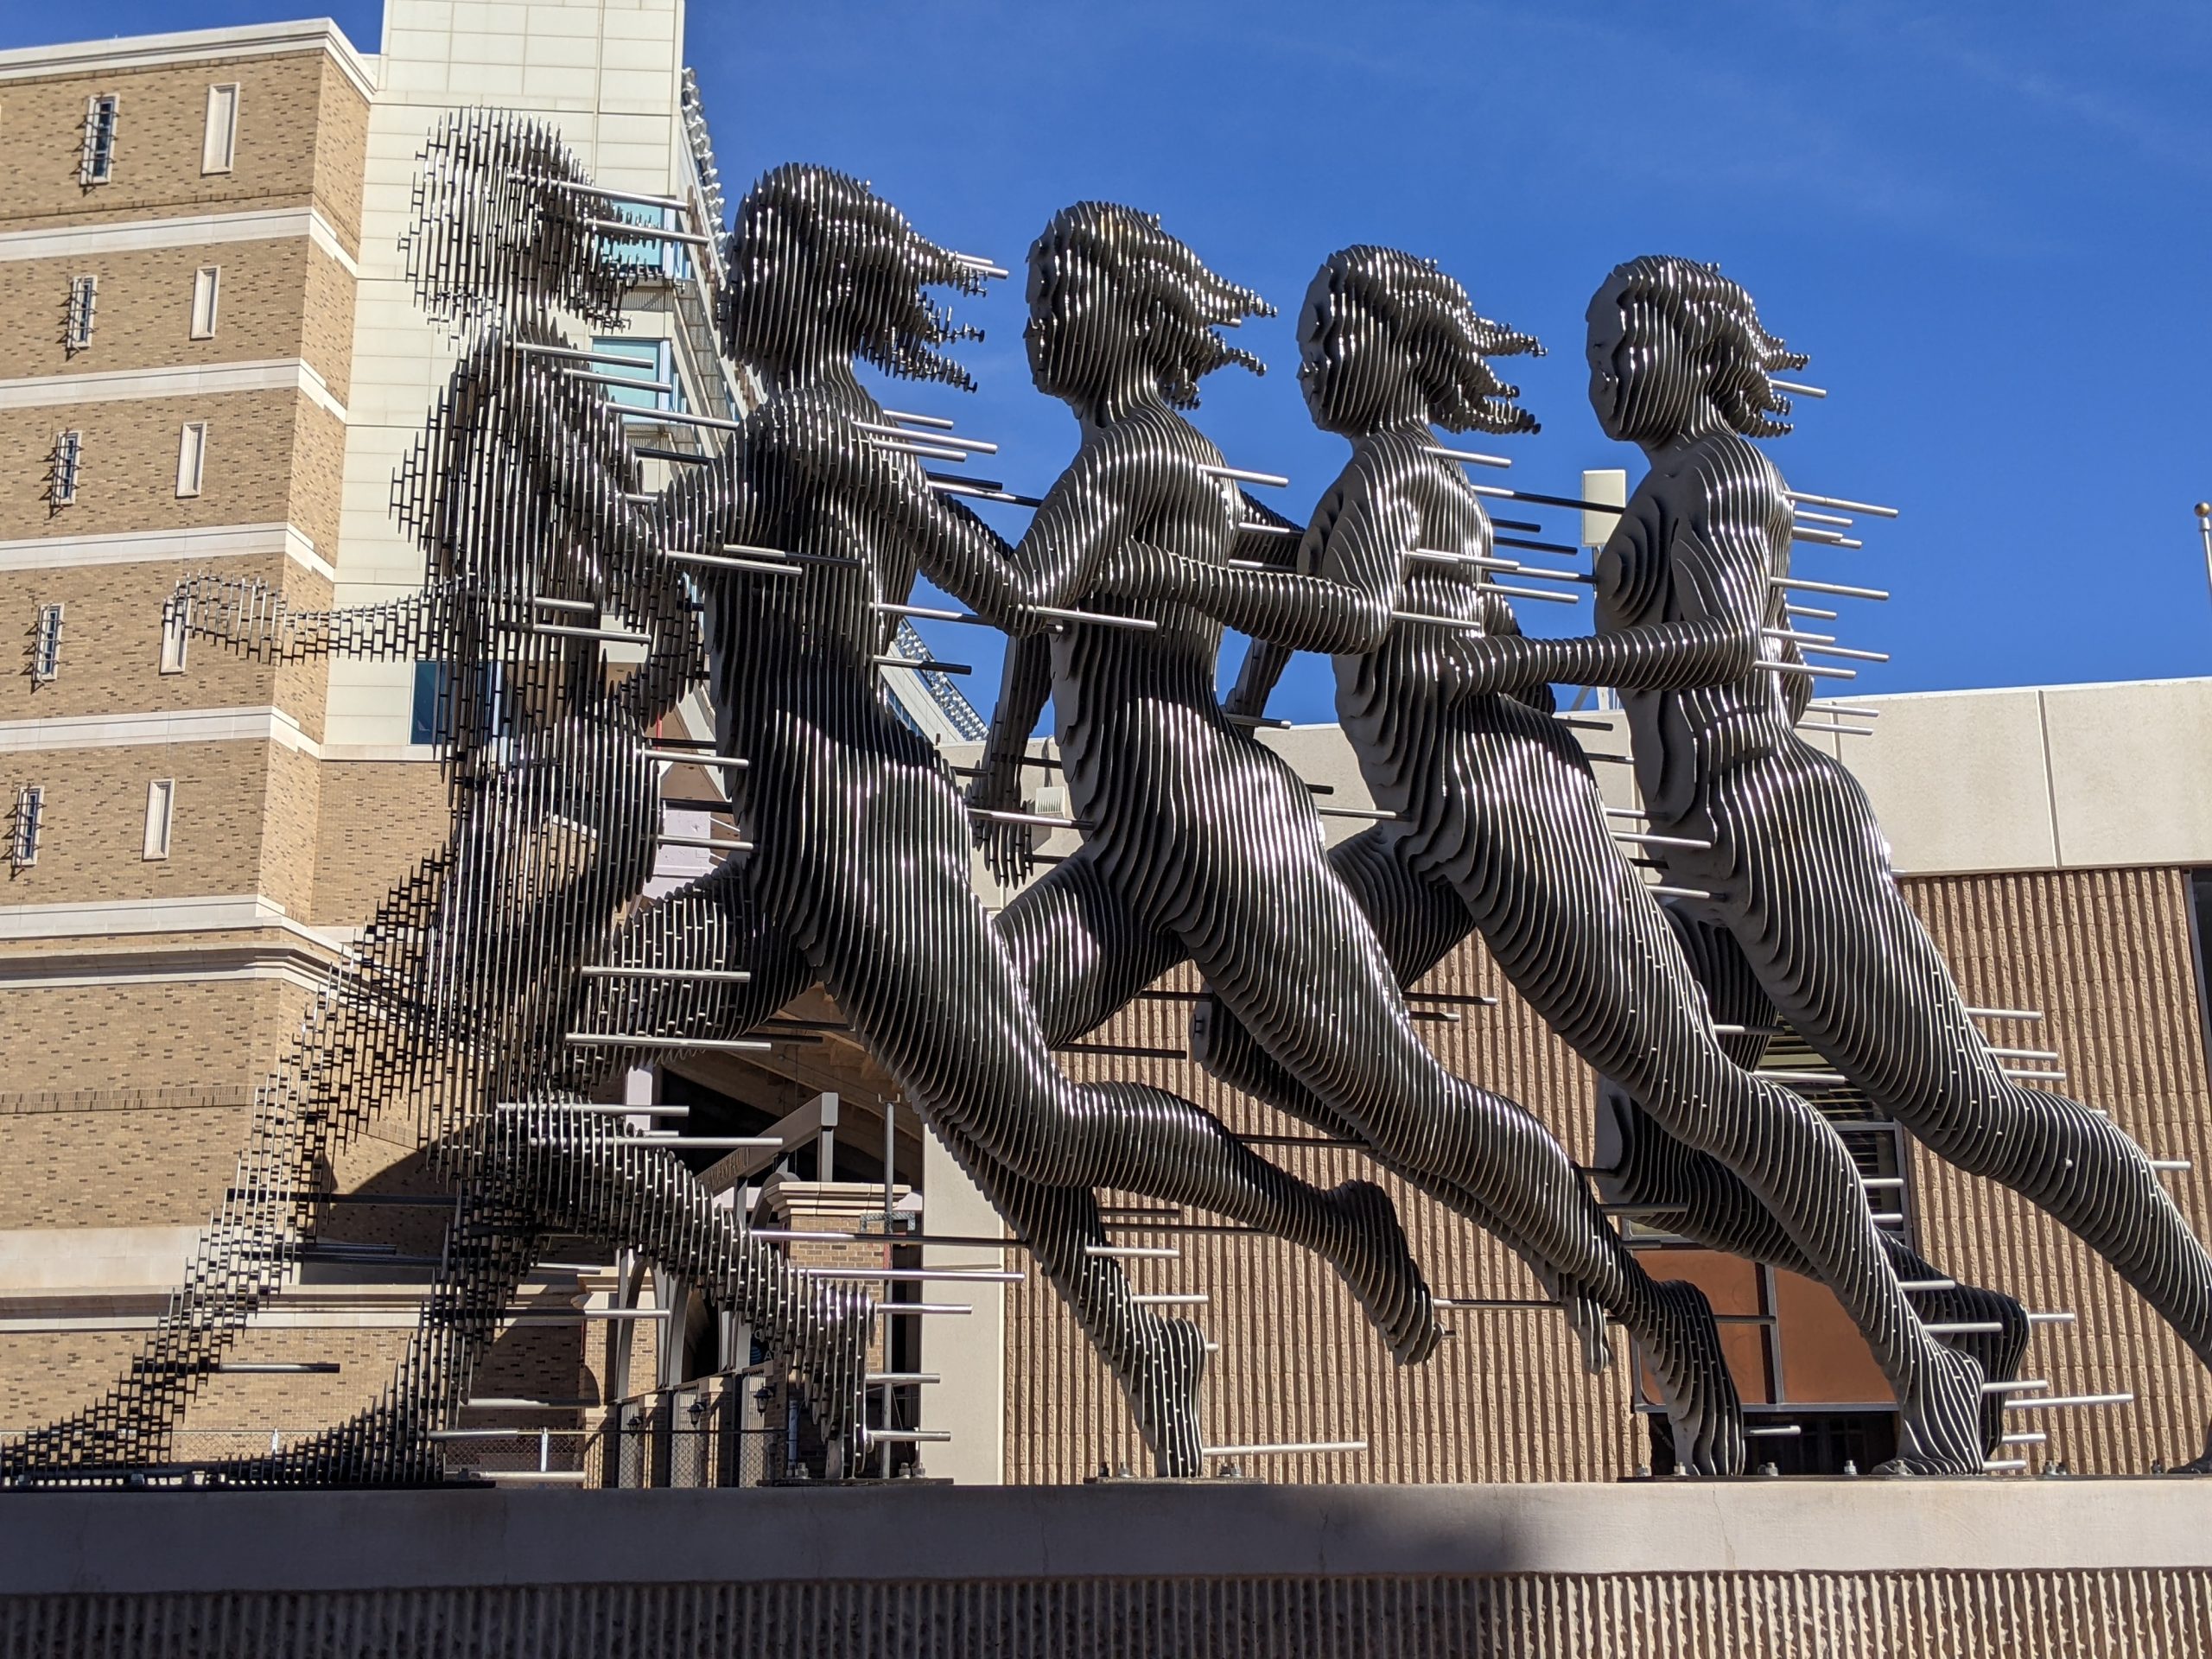 A sculpture made of metal depicts a woman running. It is located on the Texas Tech University campus